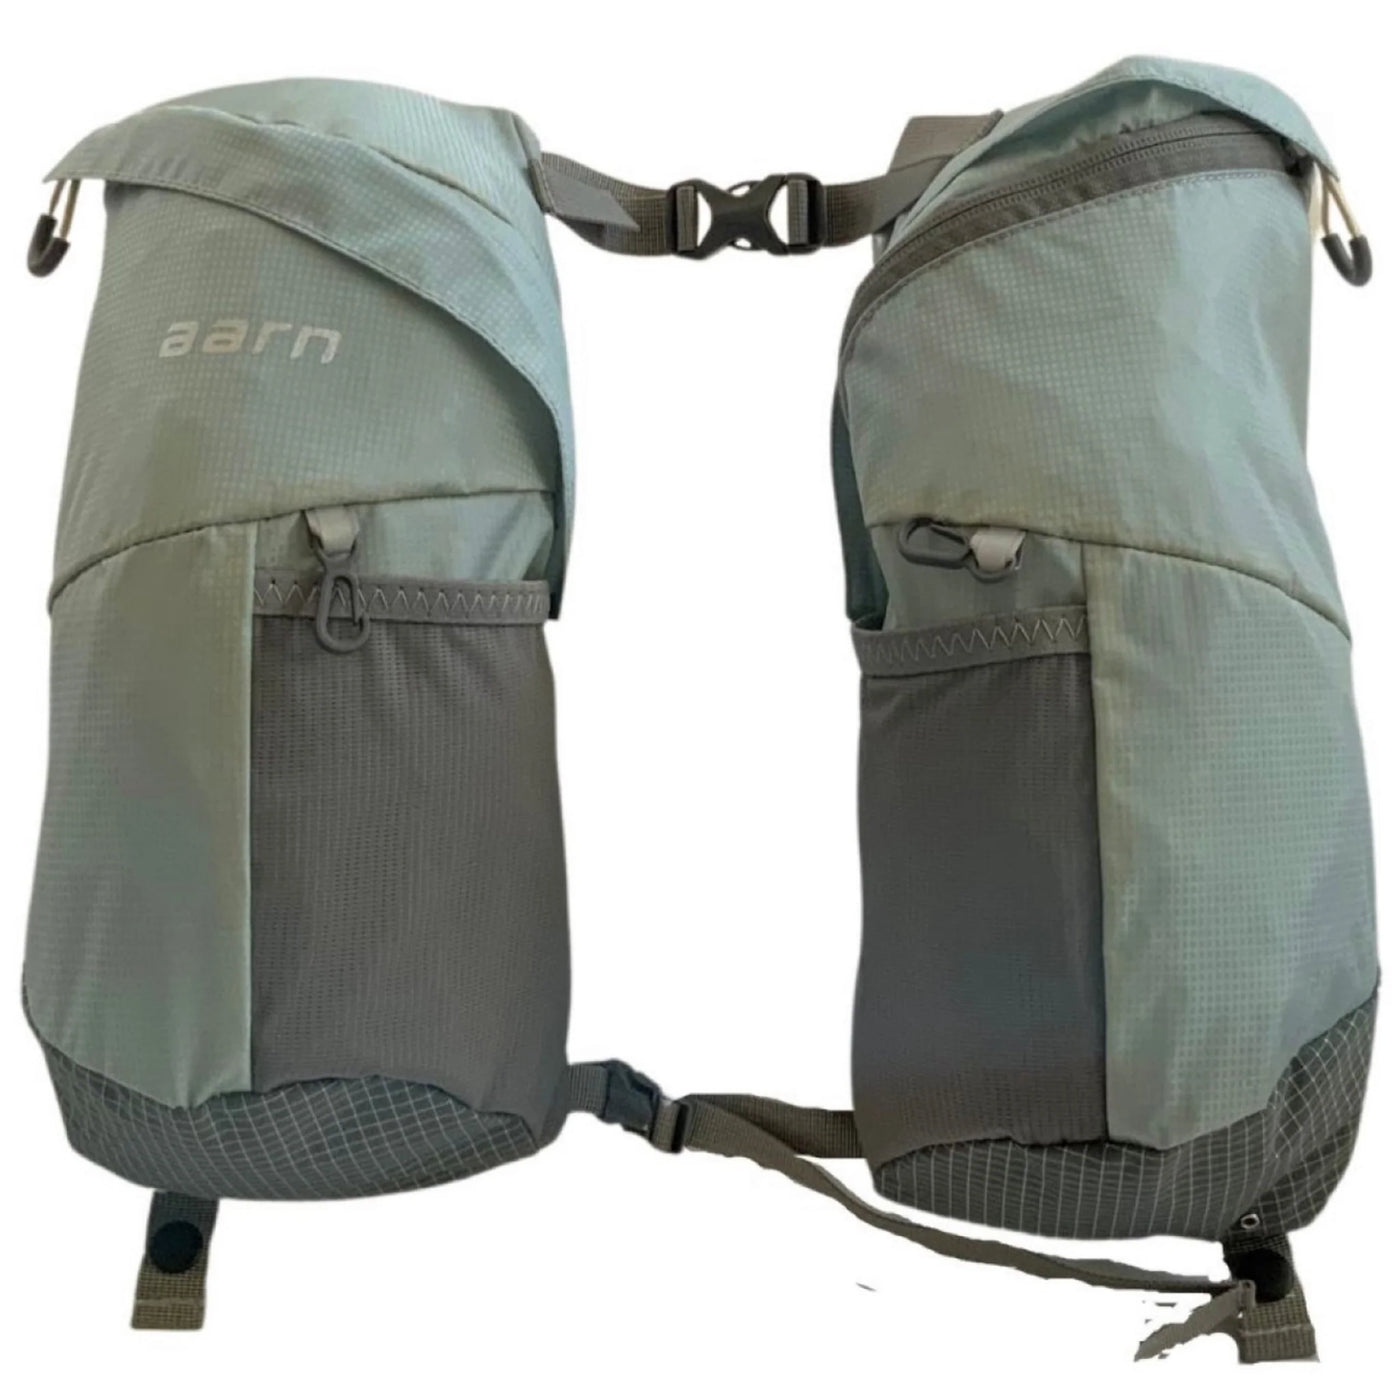 Aarn Balance Pocket Compact - 6L | Aarn Packs and Pockets | Further Faster Christchurch NZ